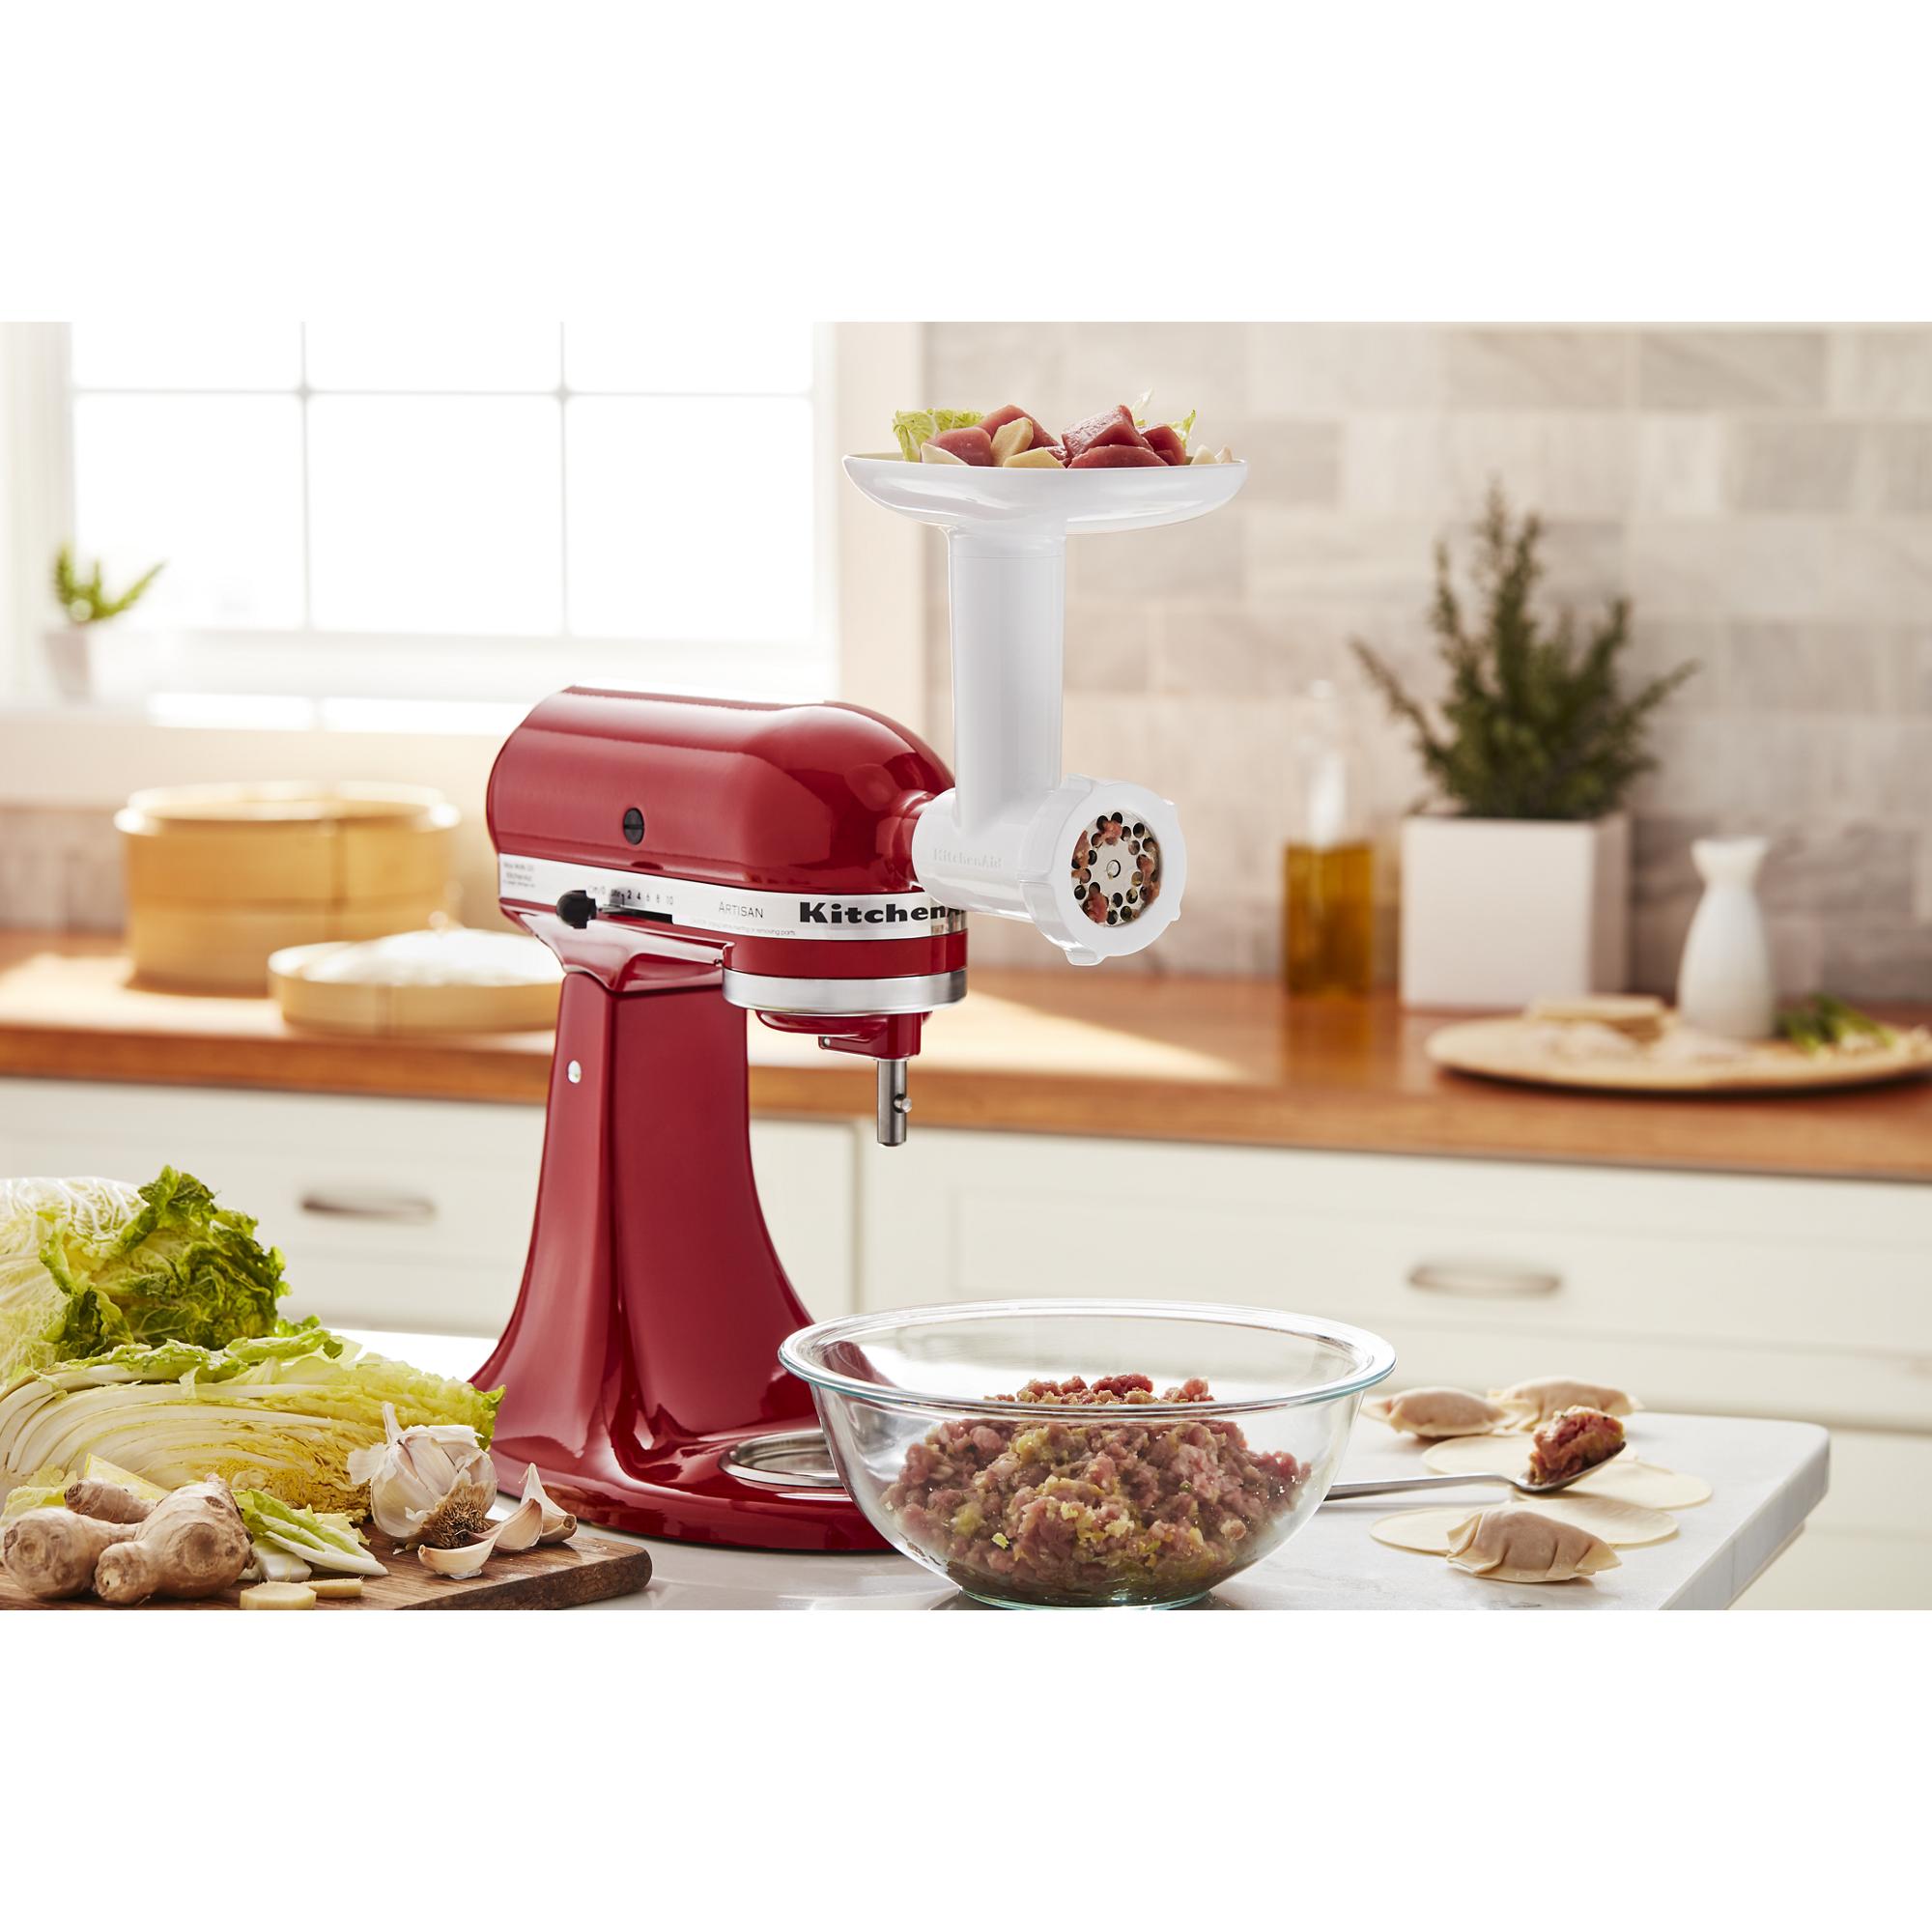 KitchenAid Mixer Attachments for sale in Scaly Mountain, North